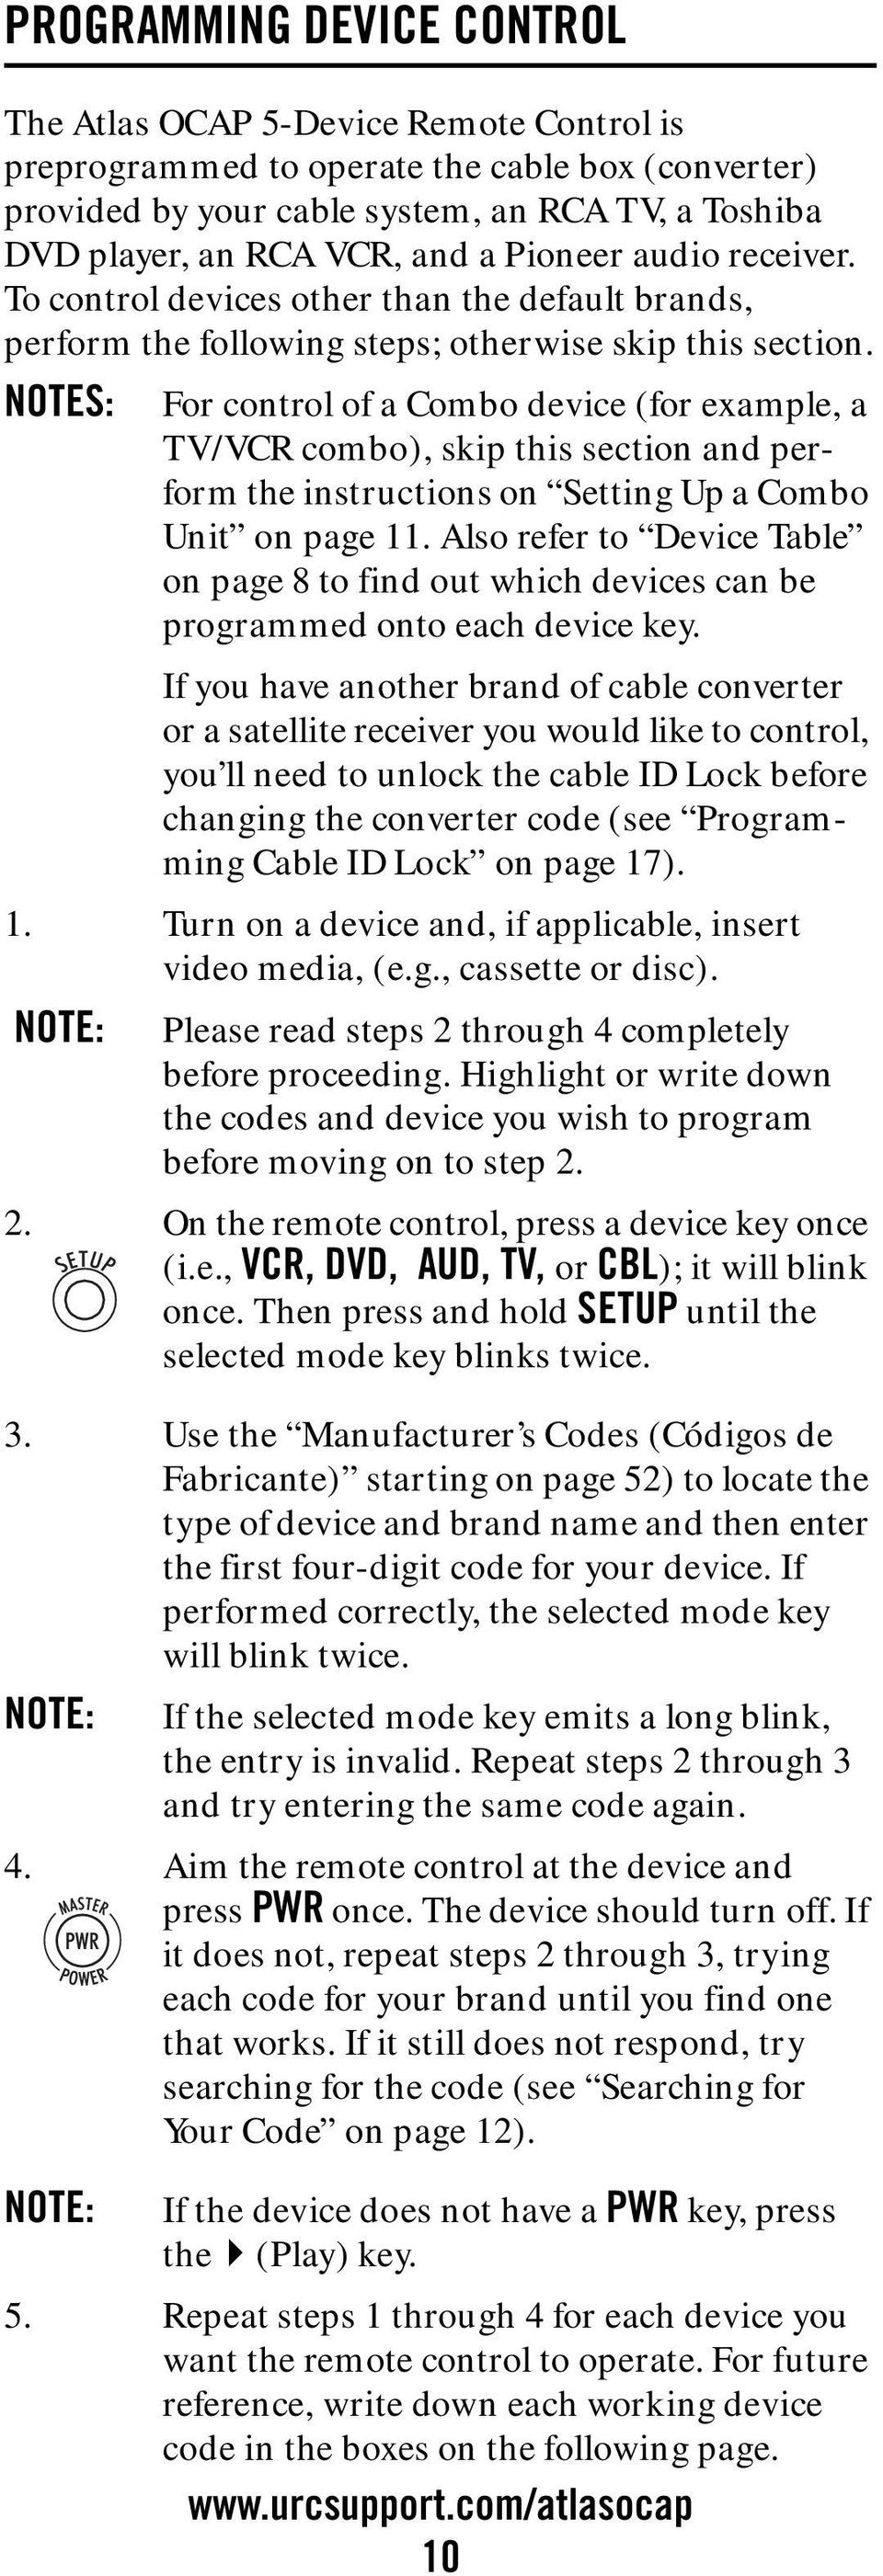 NOTES: For control of a Combo device (for example, a TV/VCR combo), skip this section and perform the instructions on Setting Up a Combo Unit on page 11.